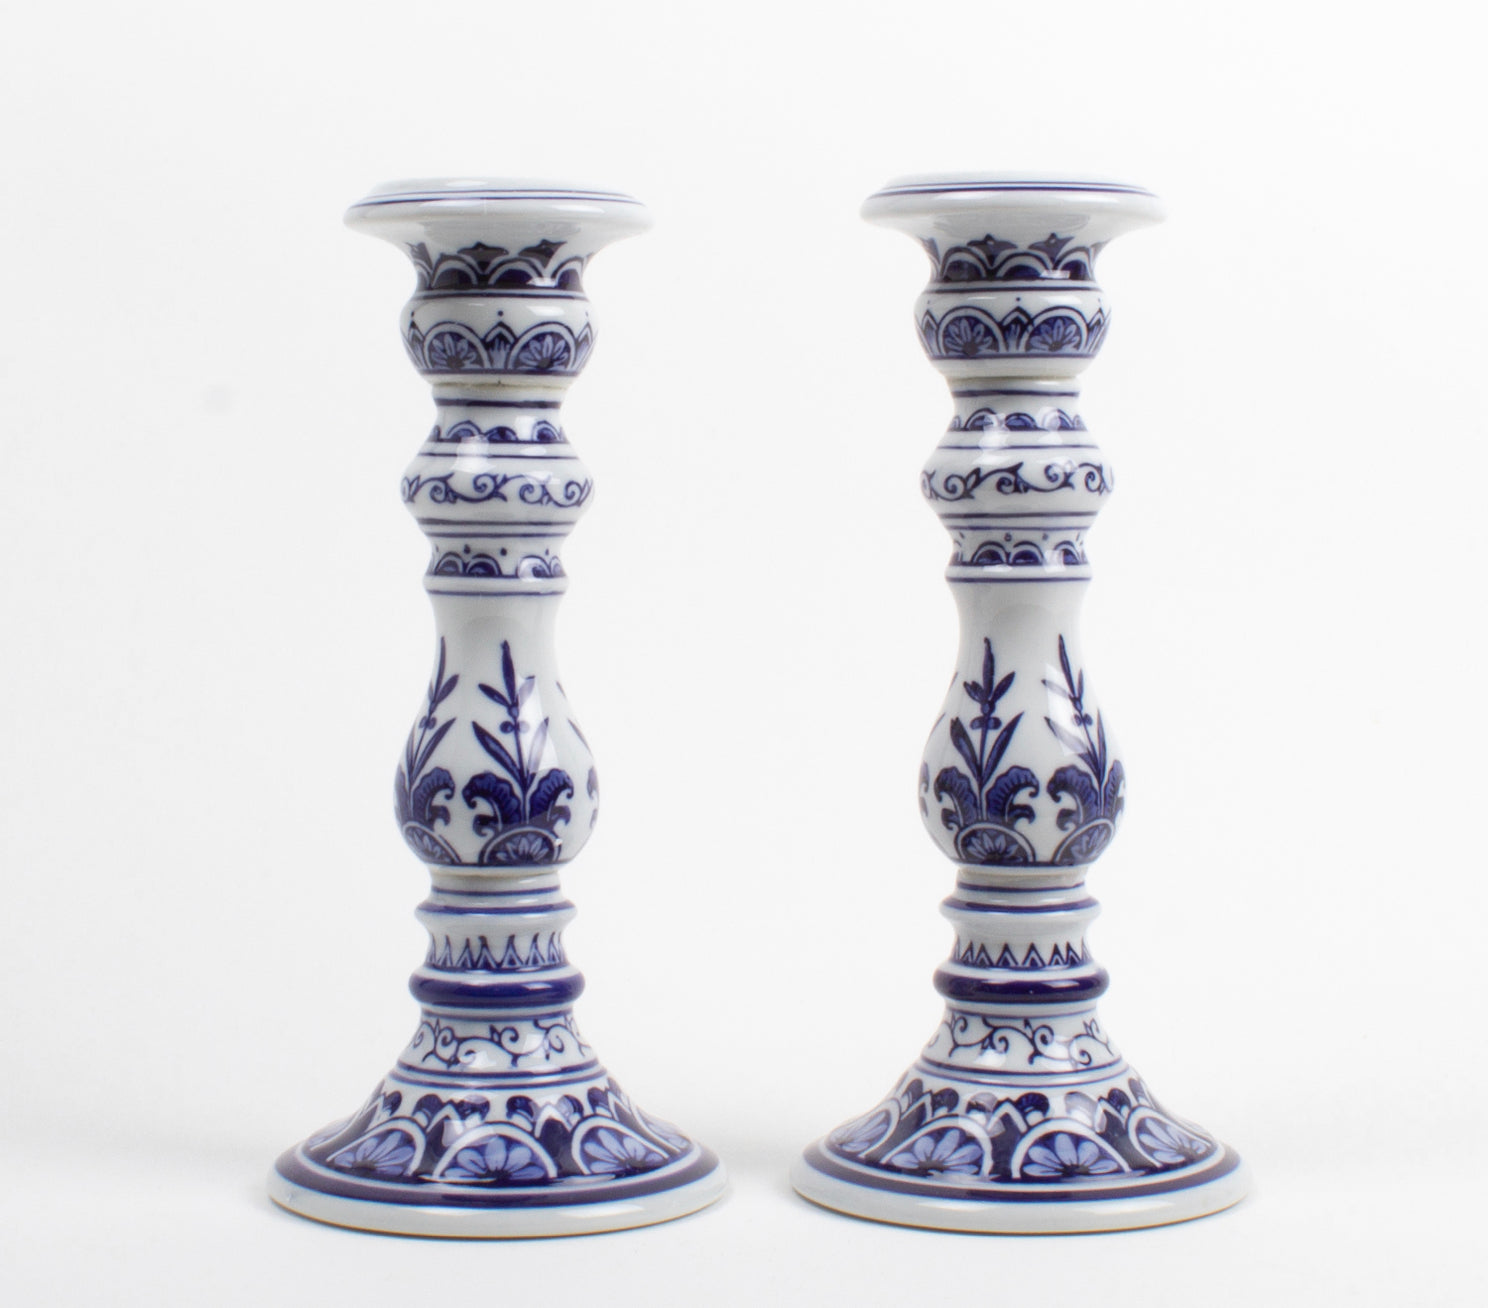 Oak Lane Chinisorie candle sticks (sold separately)